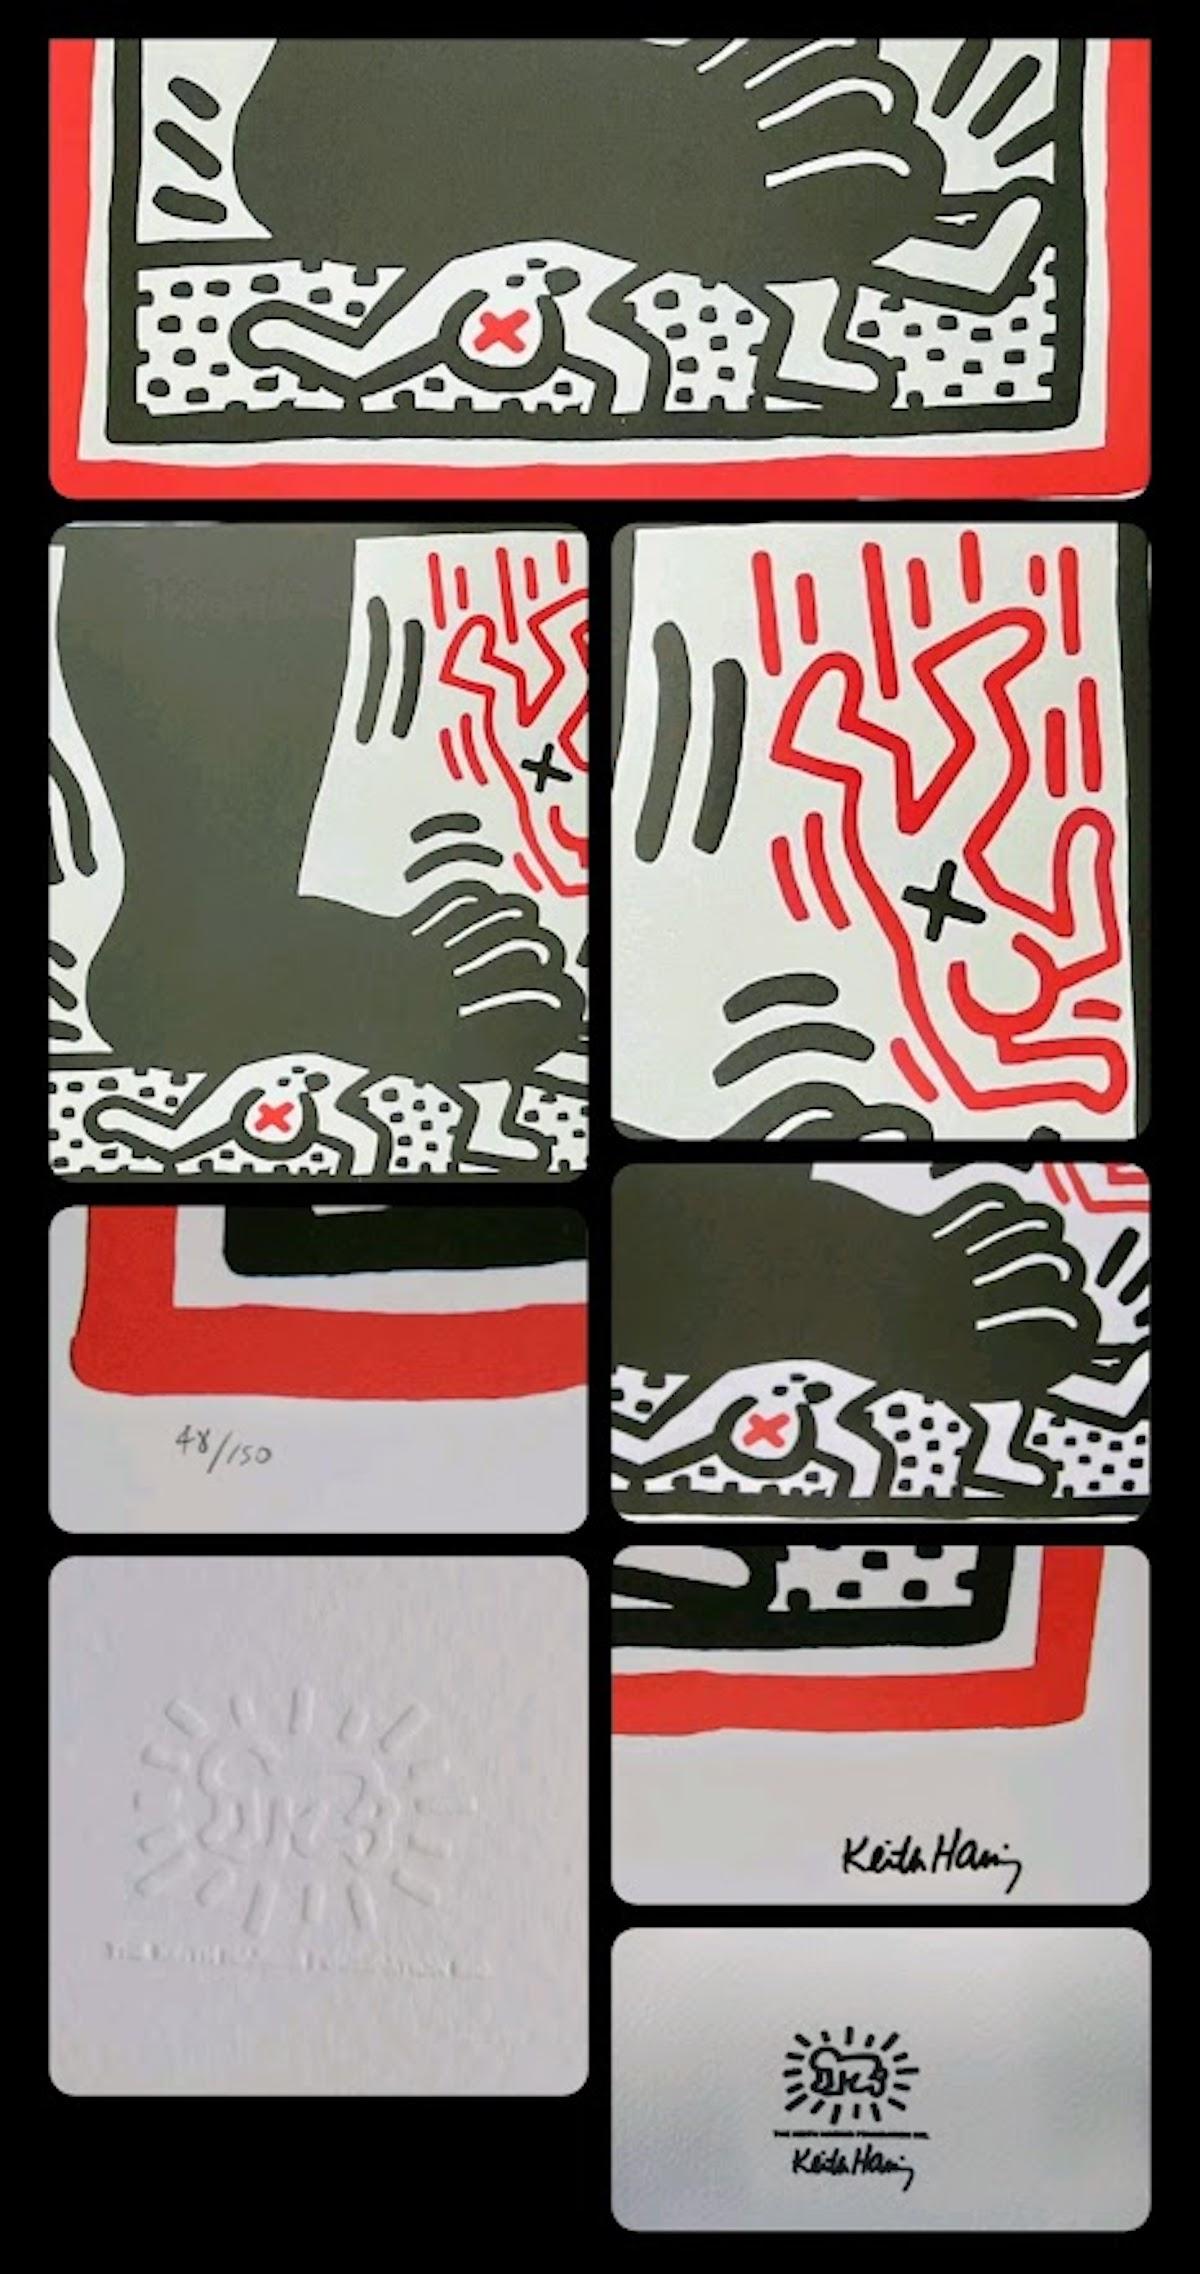 Free South Africa, Keith Haring Foundation Lithograph, Numbered /150 - Print by (after) Keith Haring